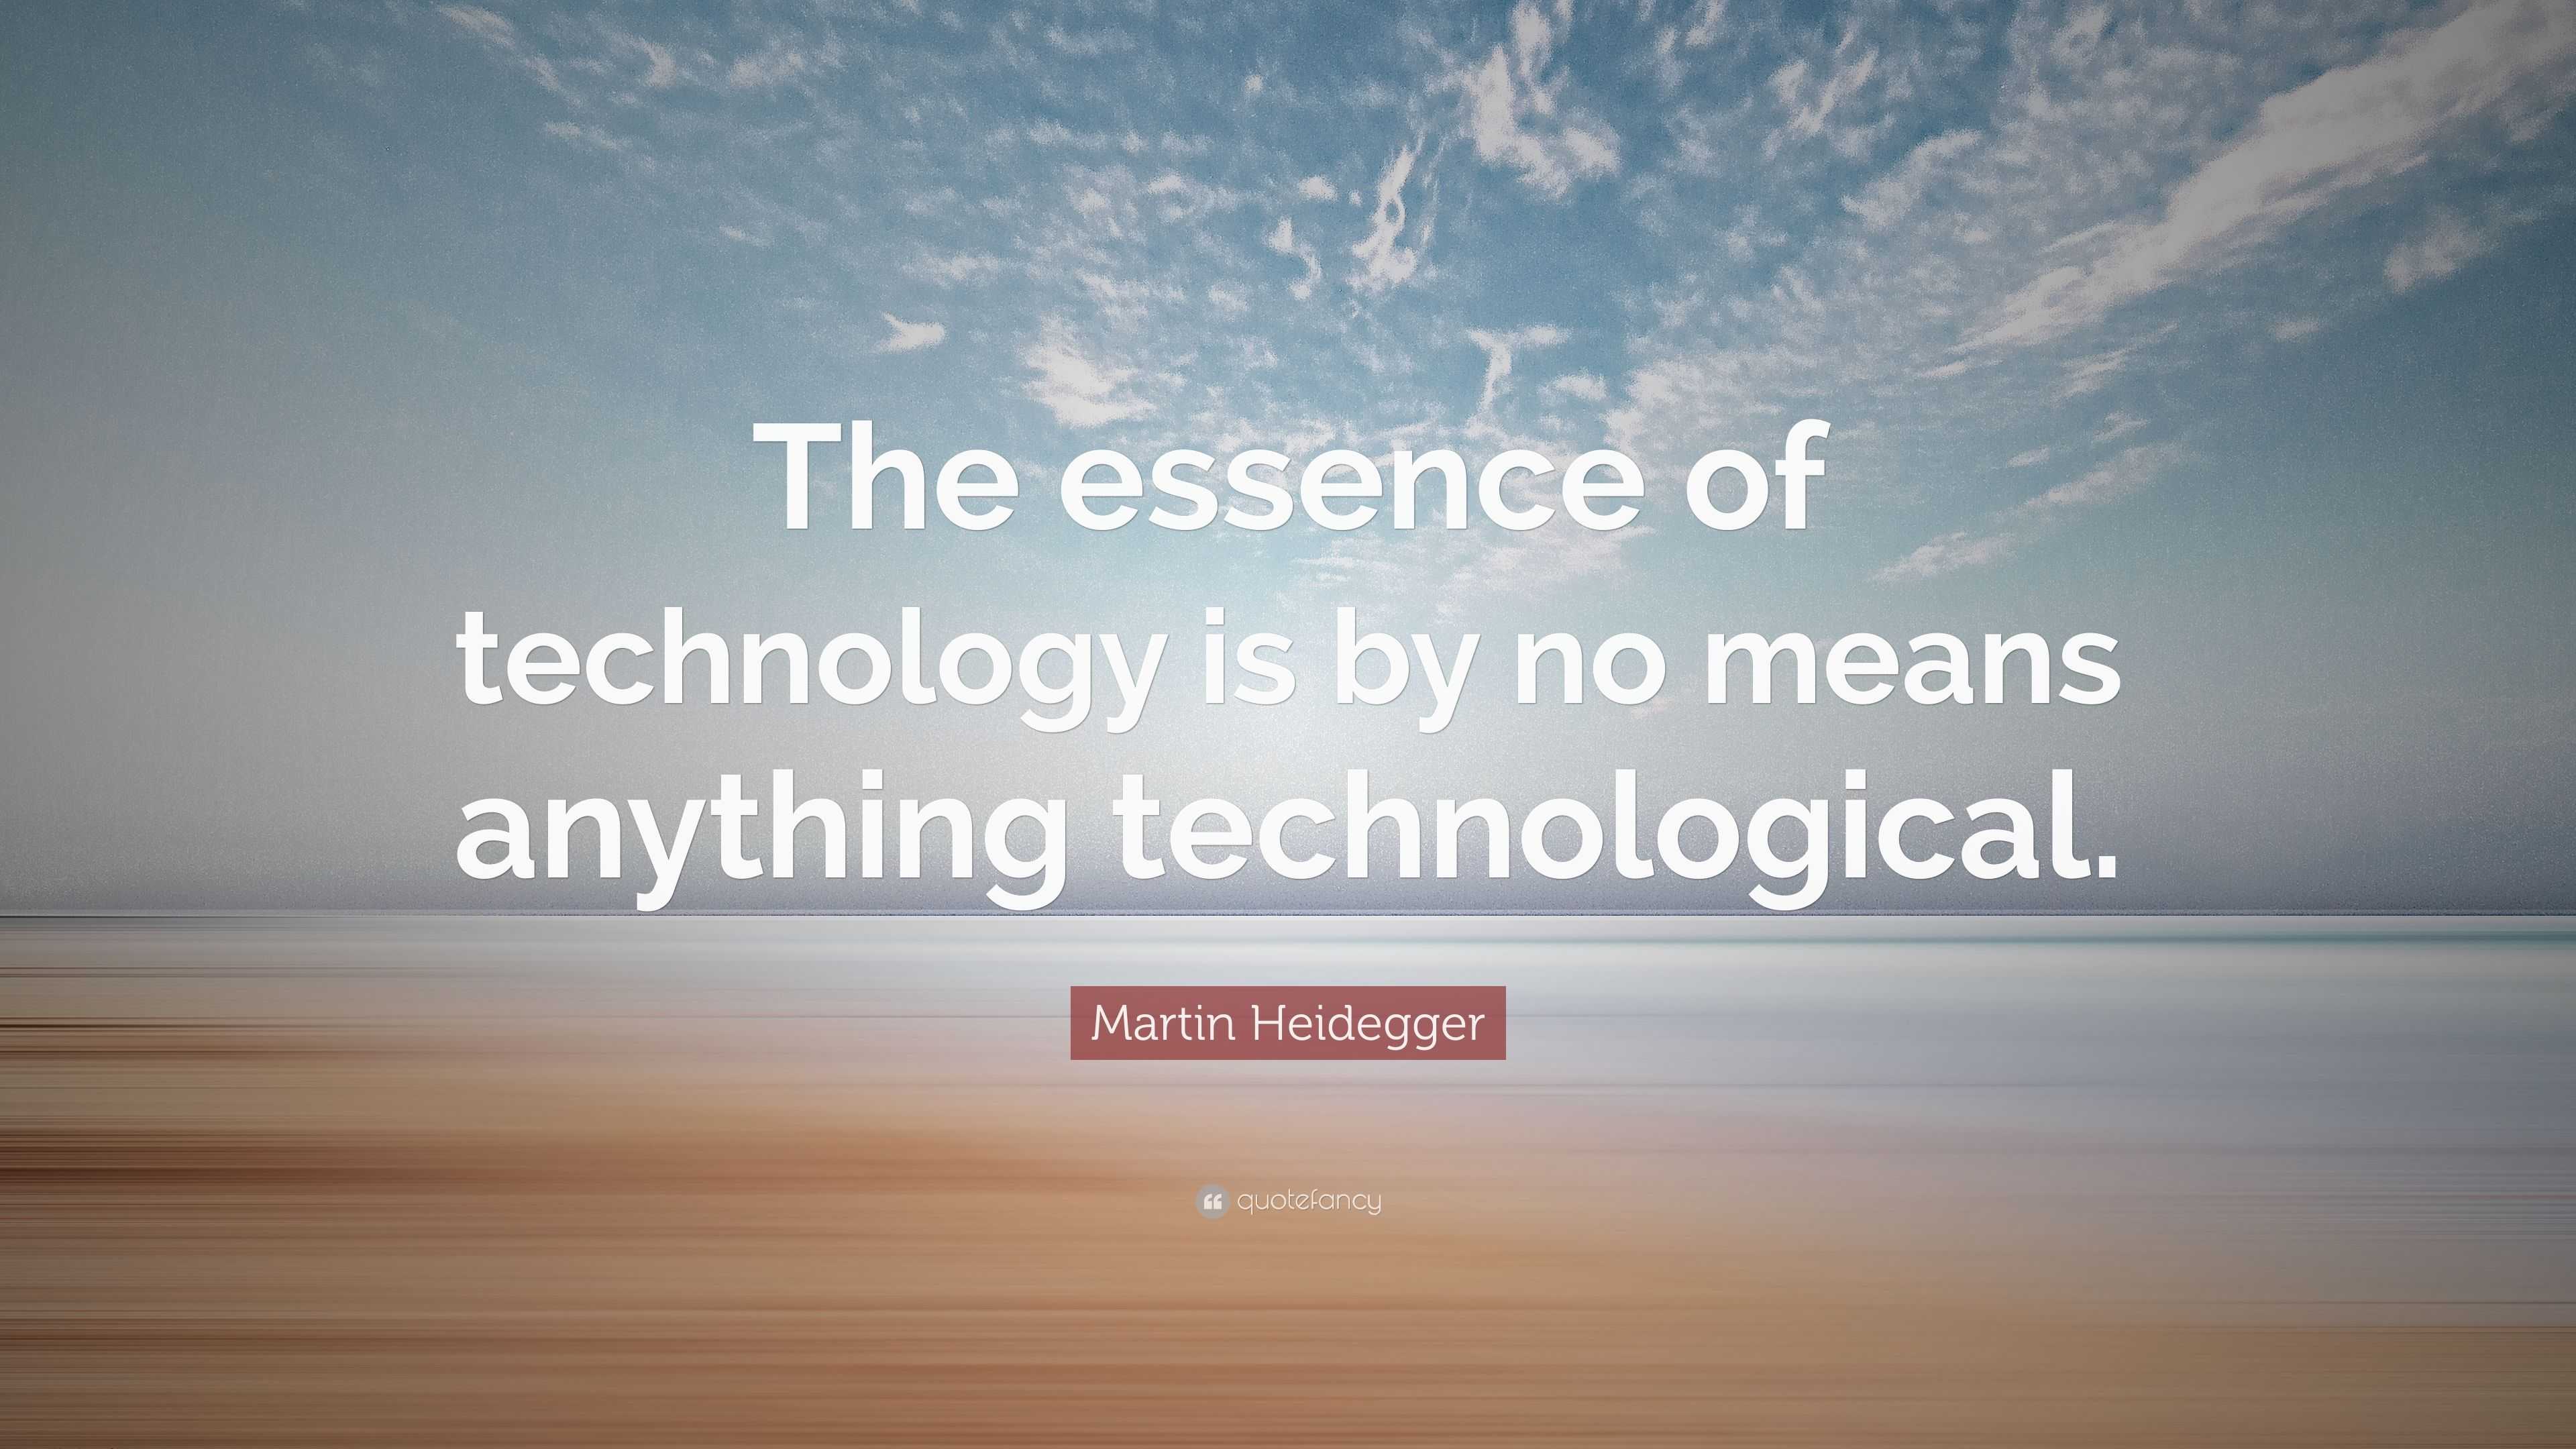 Martin Heidegger Quote: “The essence of technology is by no means ...